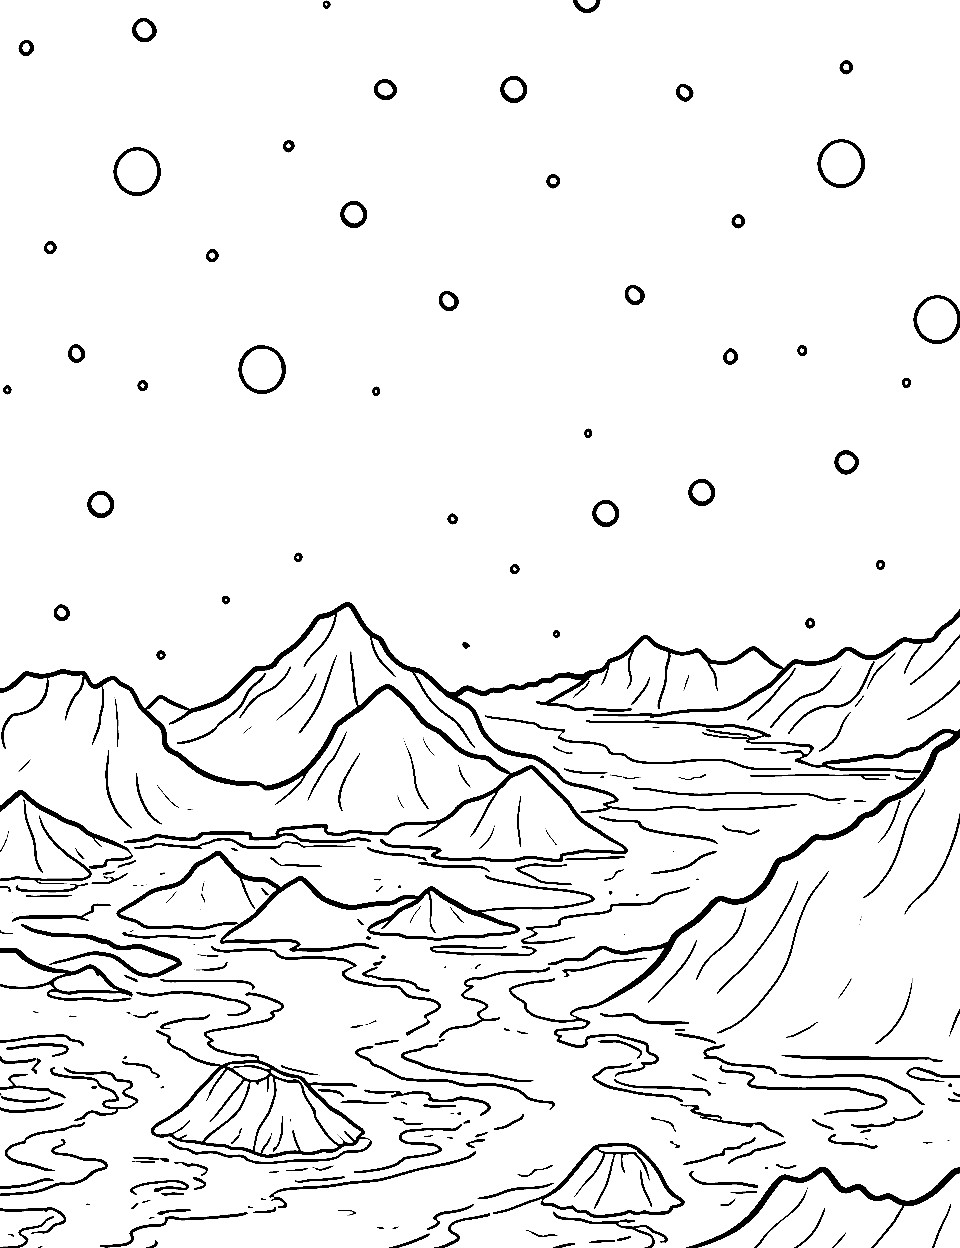 Mars's Red Mystique Coloring Page - The reddish terrain of Mars with mountains and valleys.